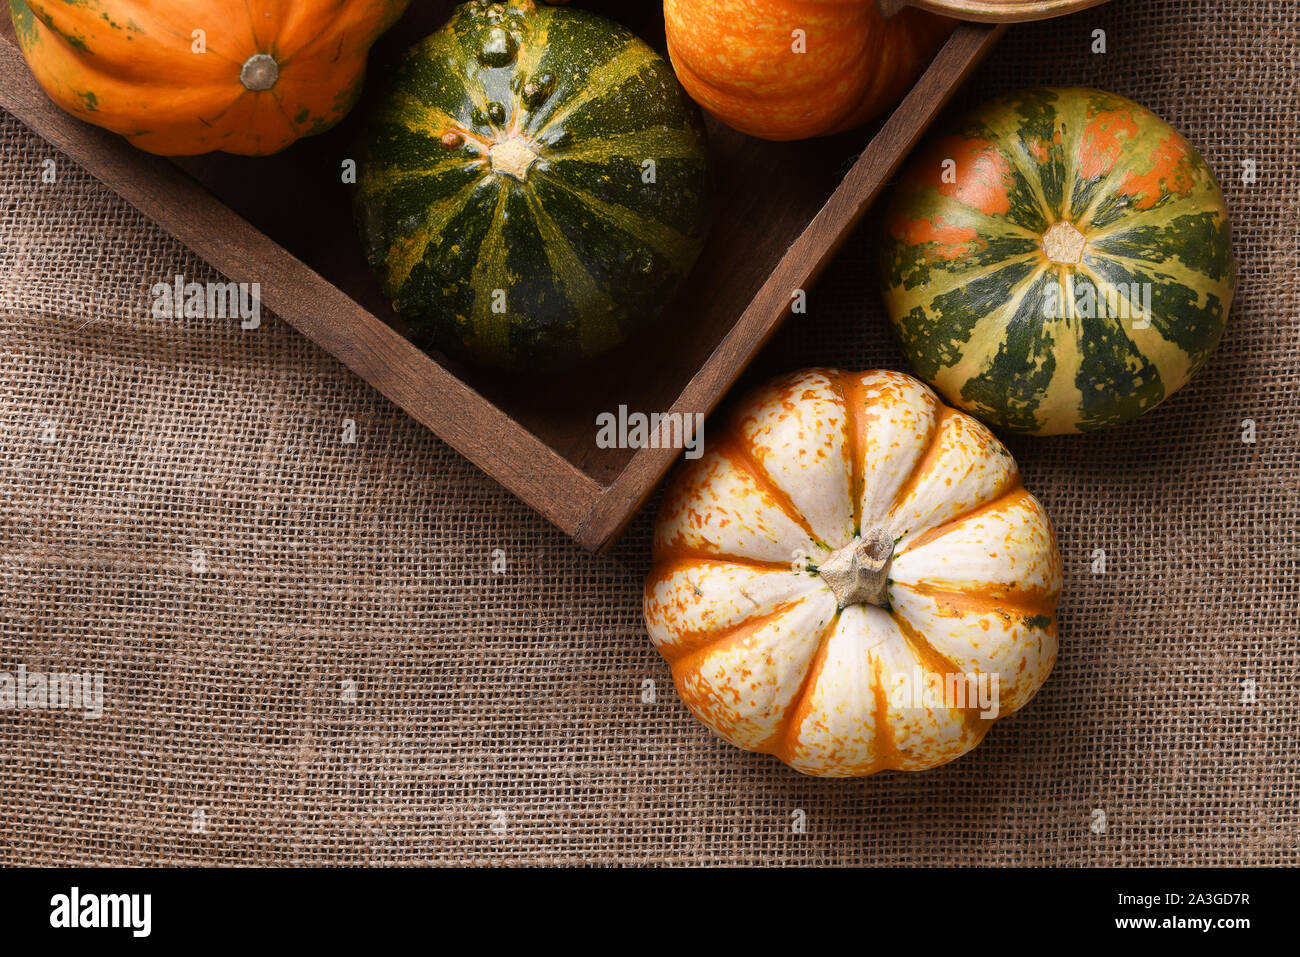 High angle shot of a group of autumn gourds, squash and pumpkins in a wood box on burlap. Stock Photo